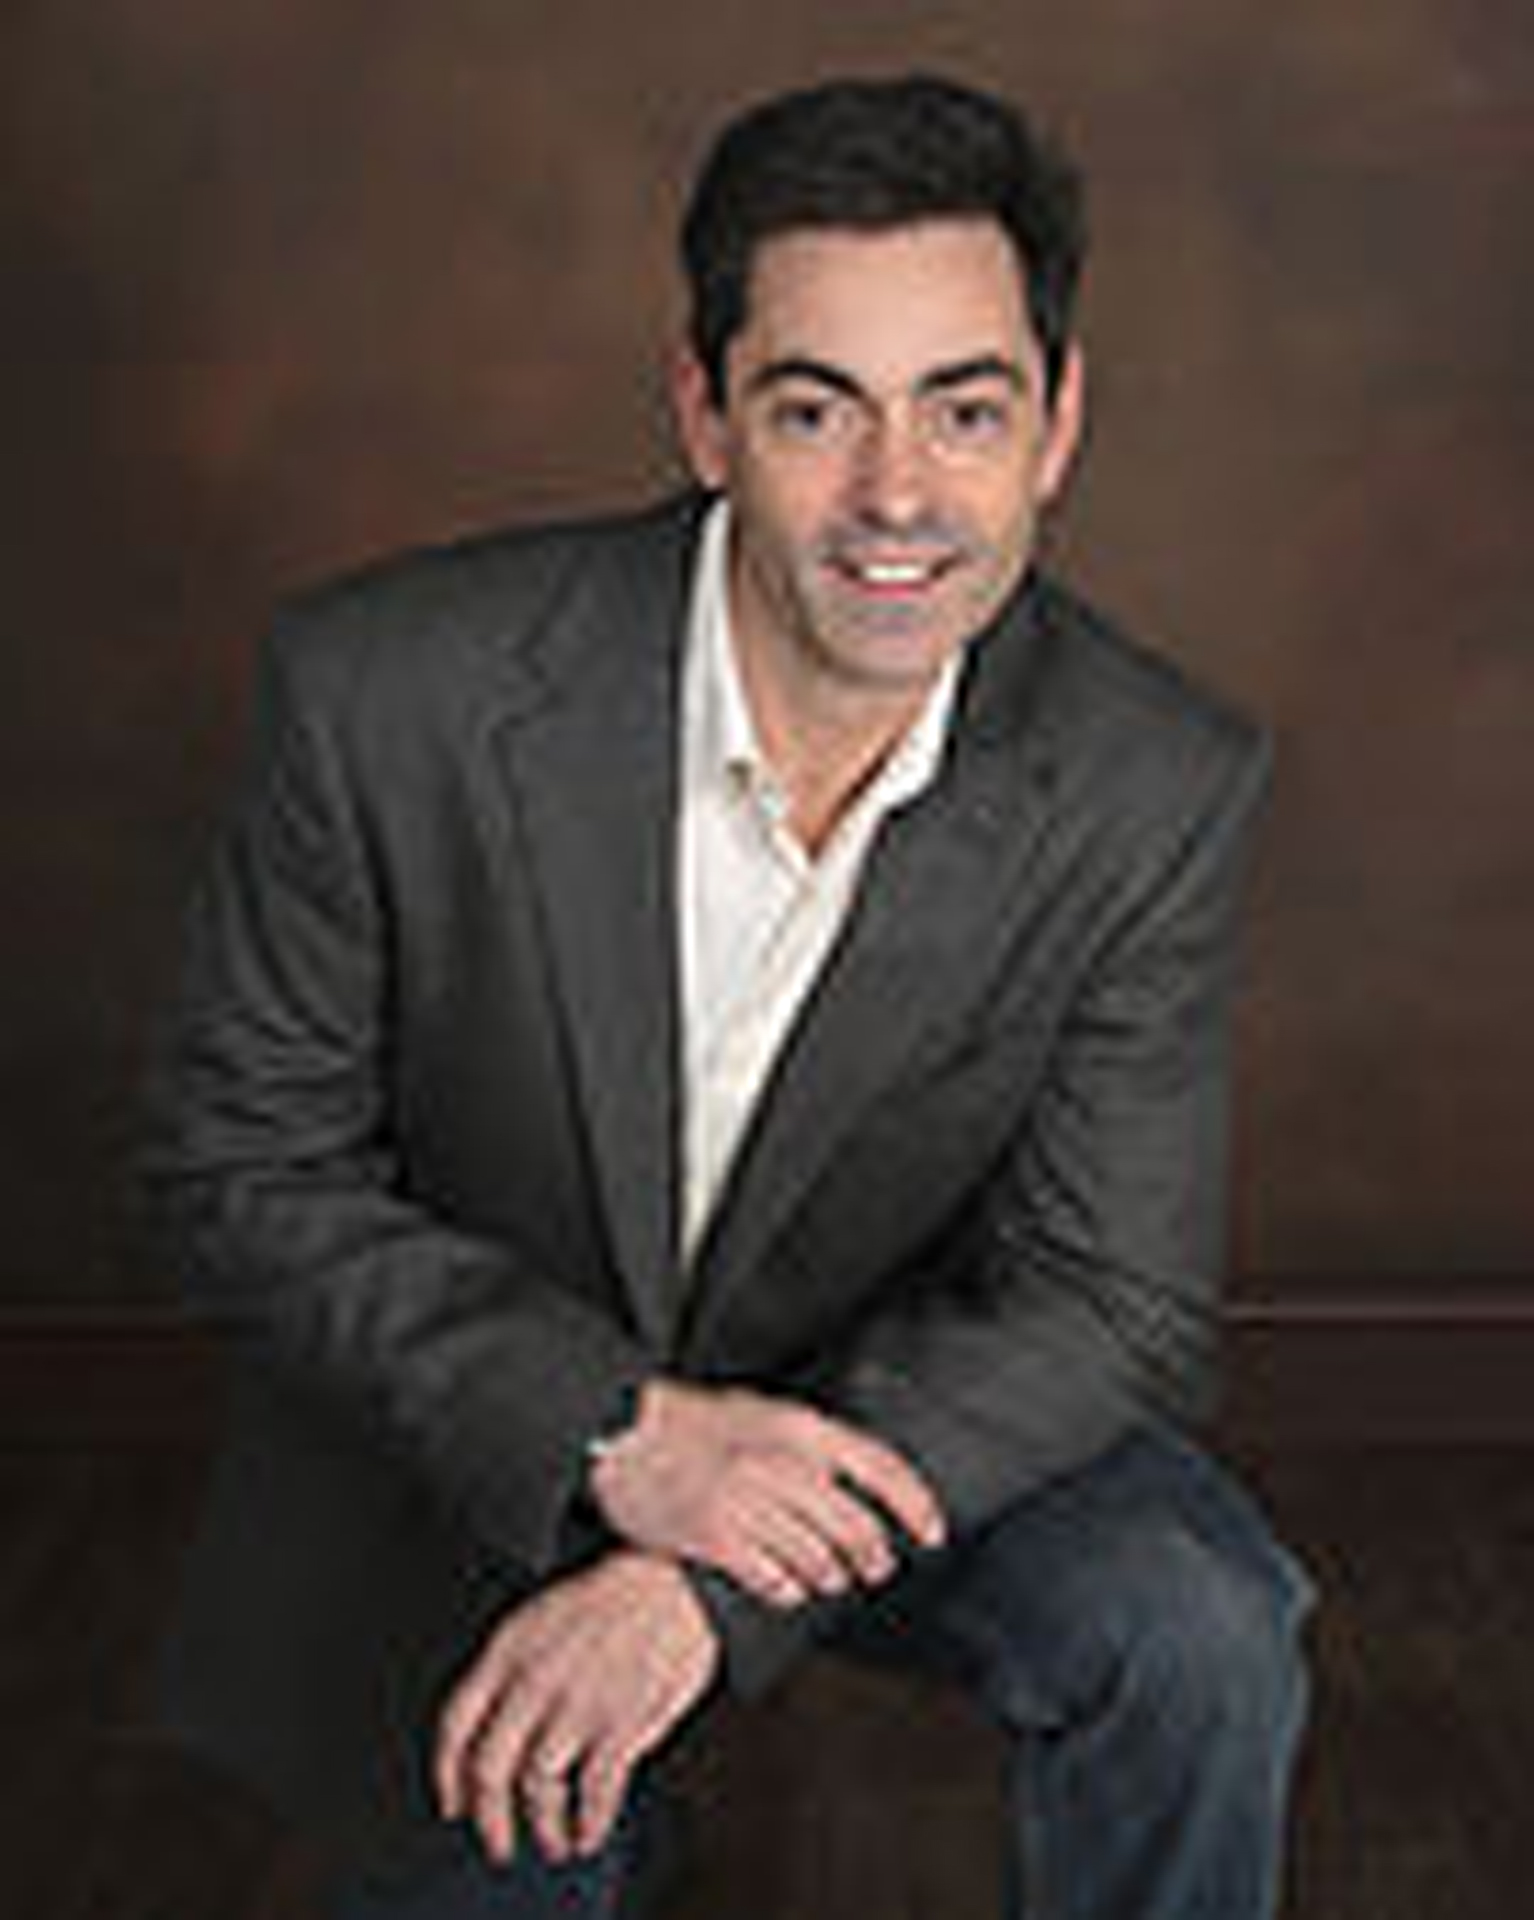 Peter Romaniello, owner of Conceptural Lighting, LLC, who has 20+ years of experience with architectural lighting